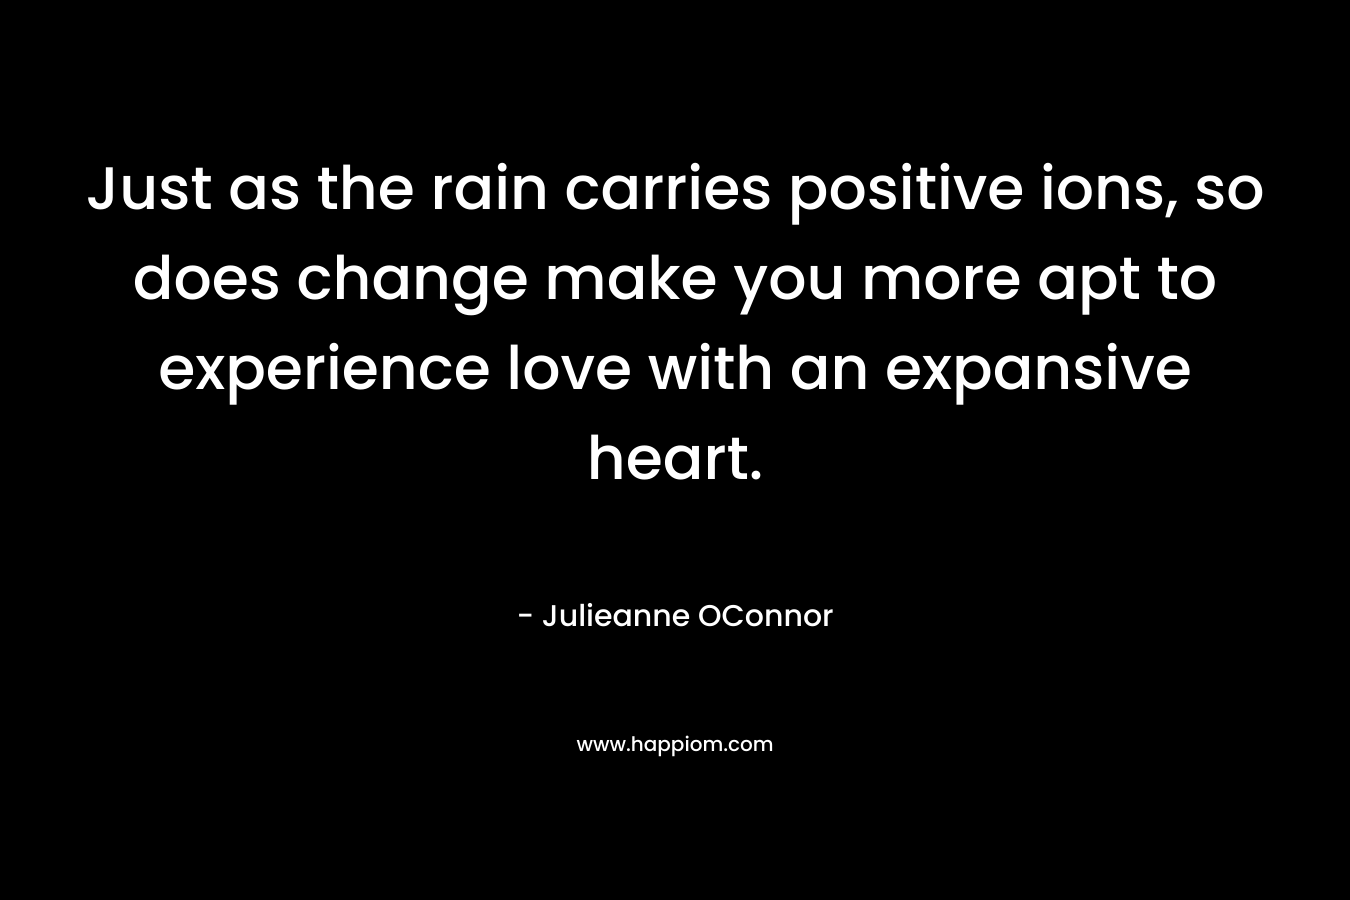 Just as the rain carries positive ions, so does change make you more apt to experience love with an expansive heart. – Julieanne OConnor